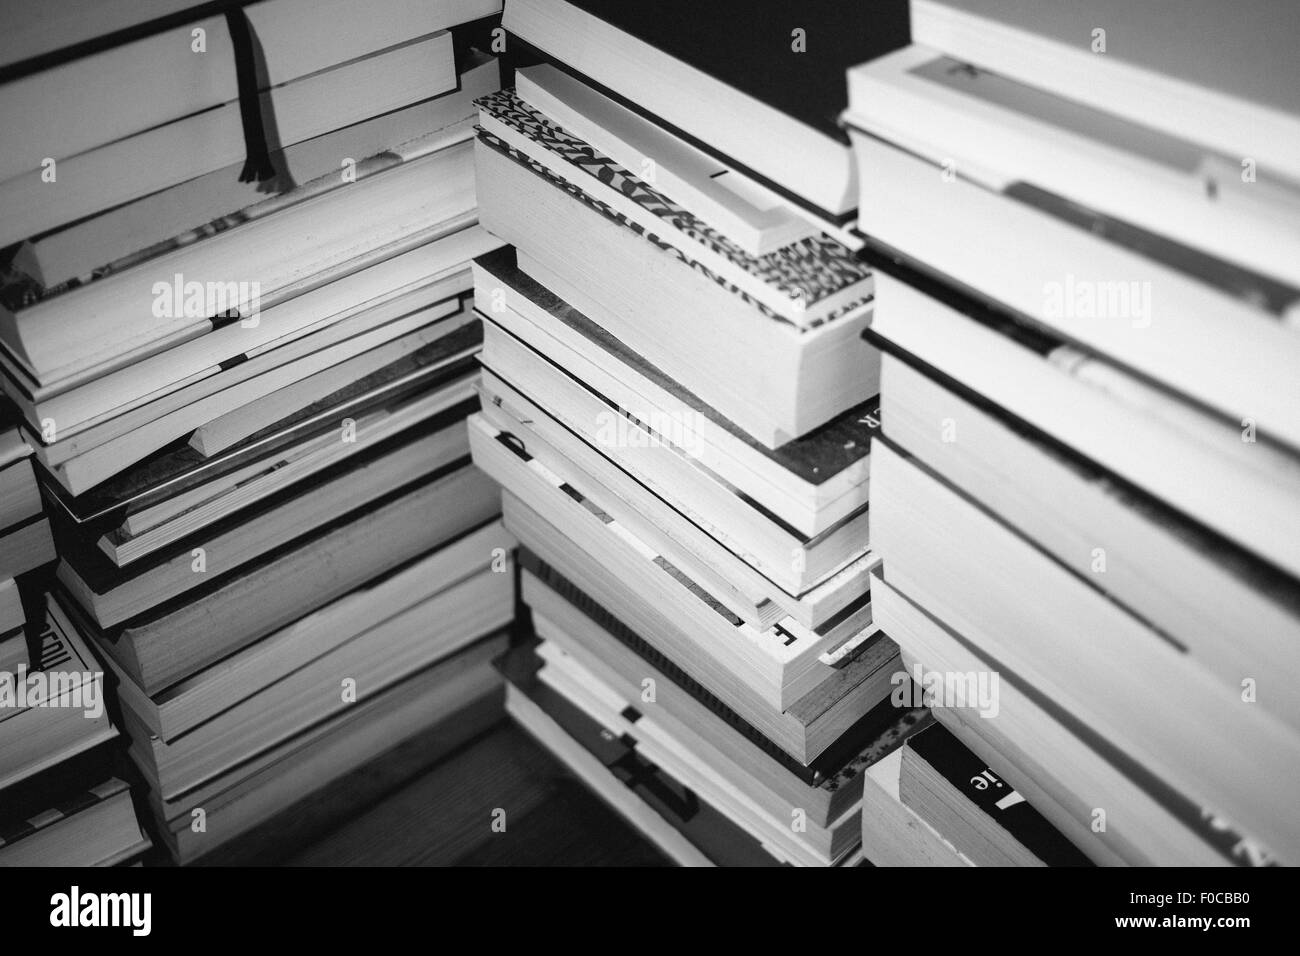 Stacks of books on table Stock Photo